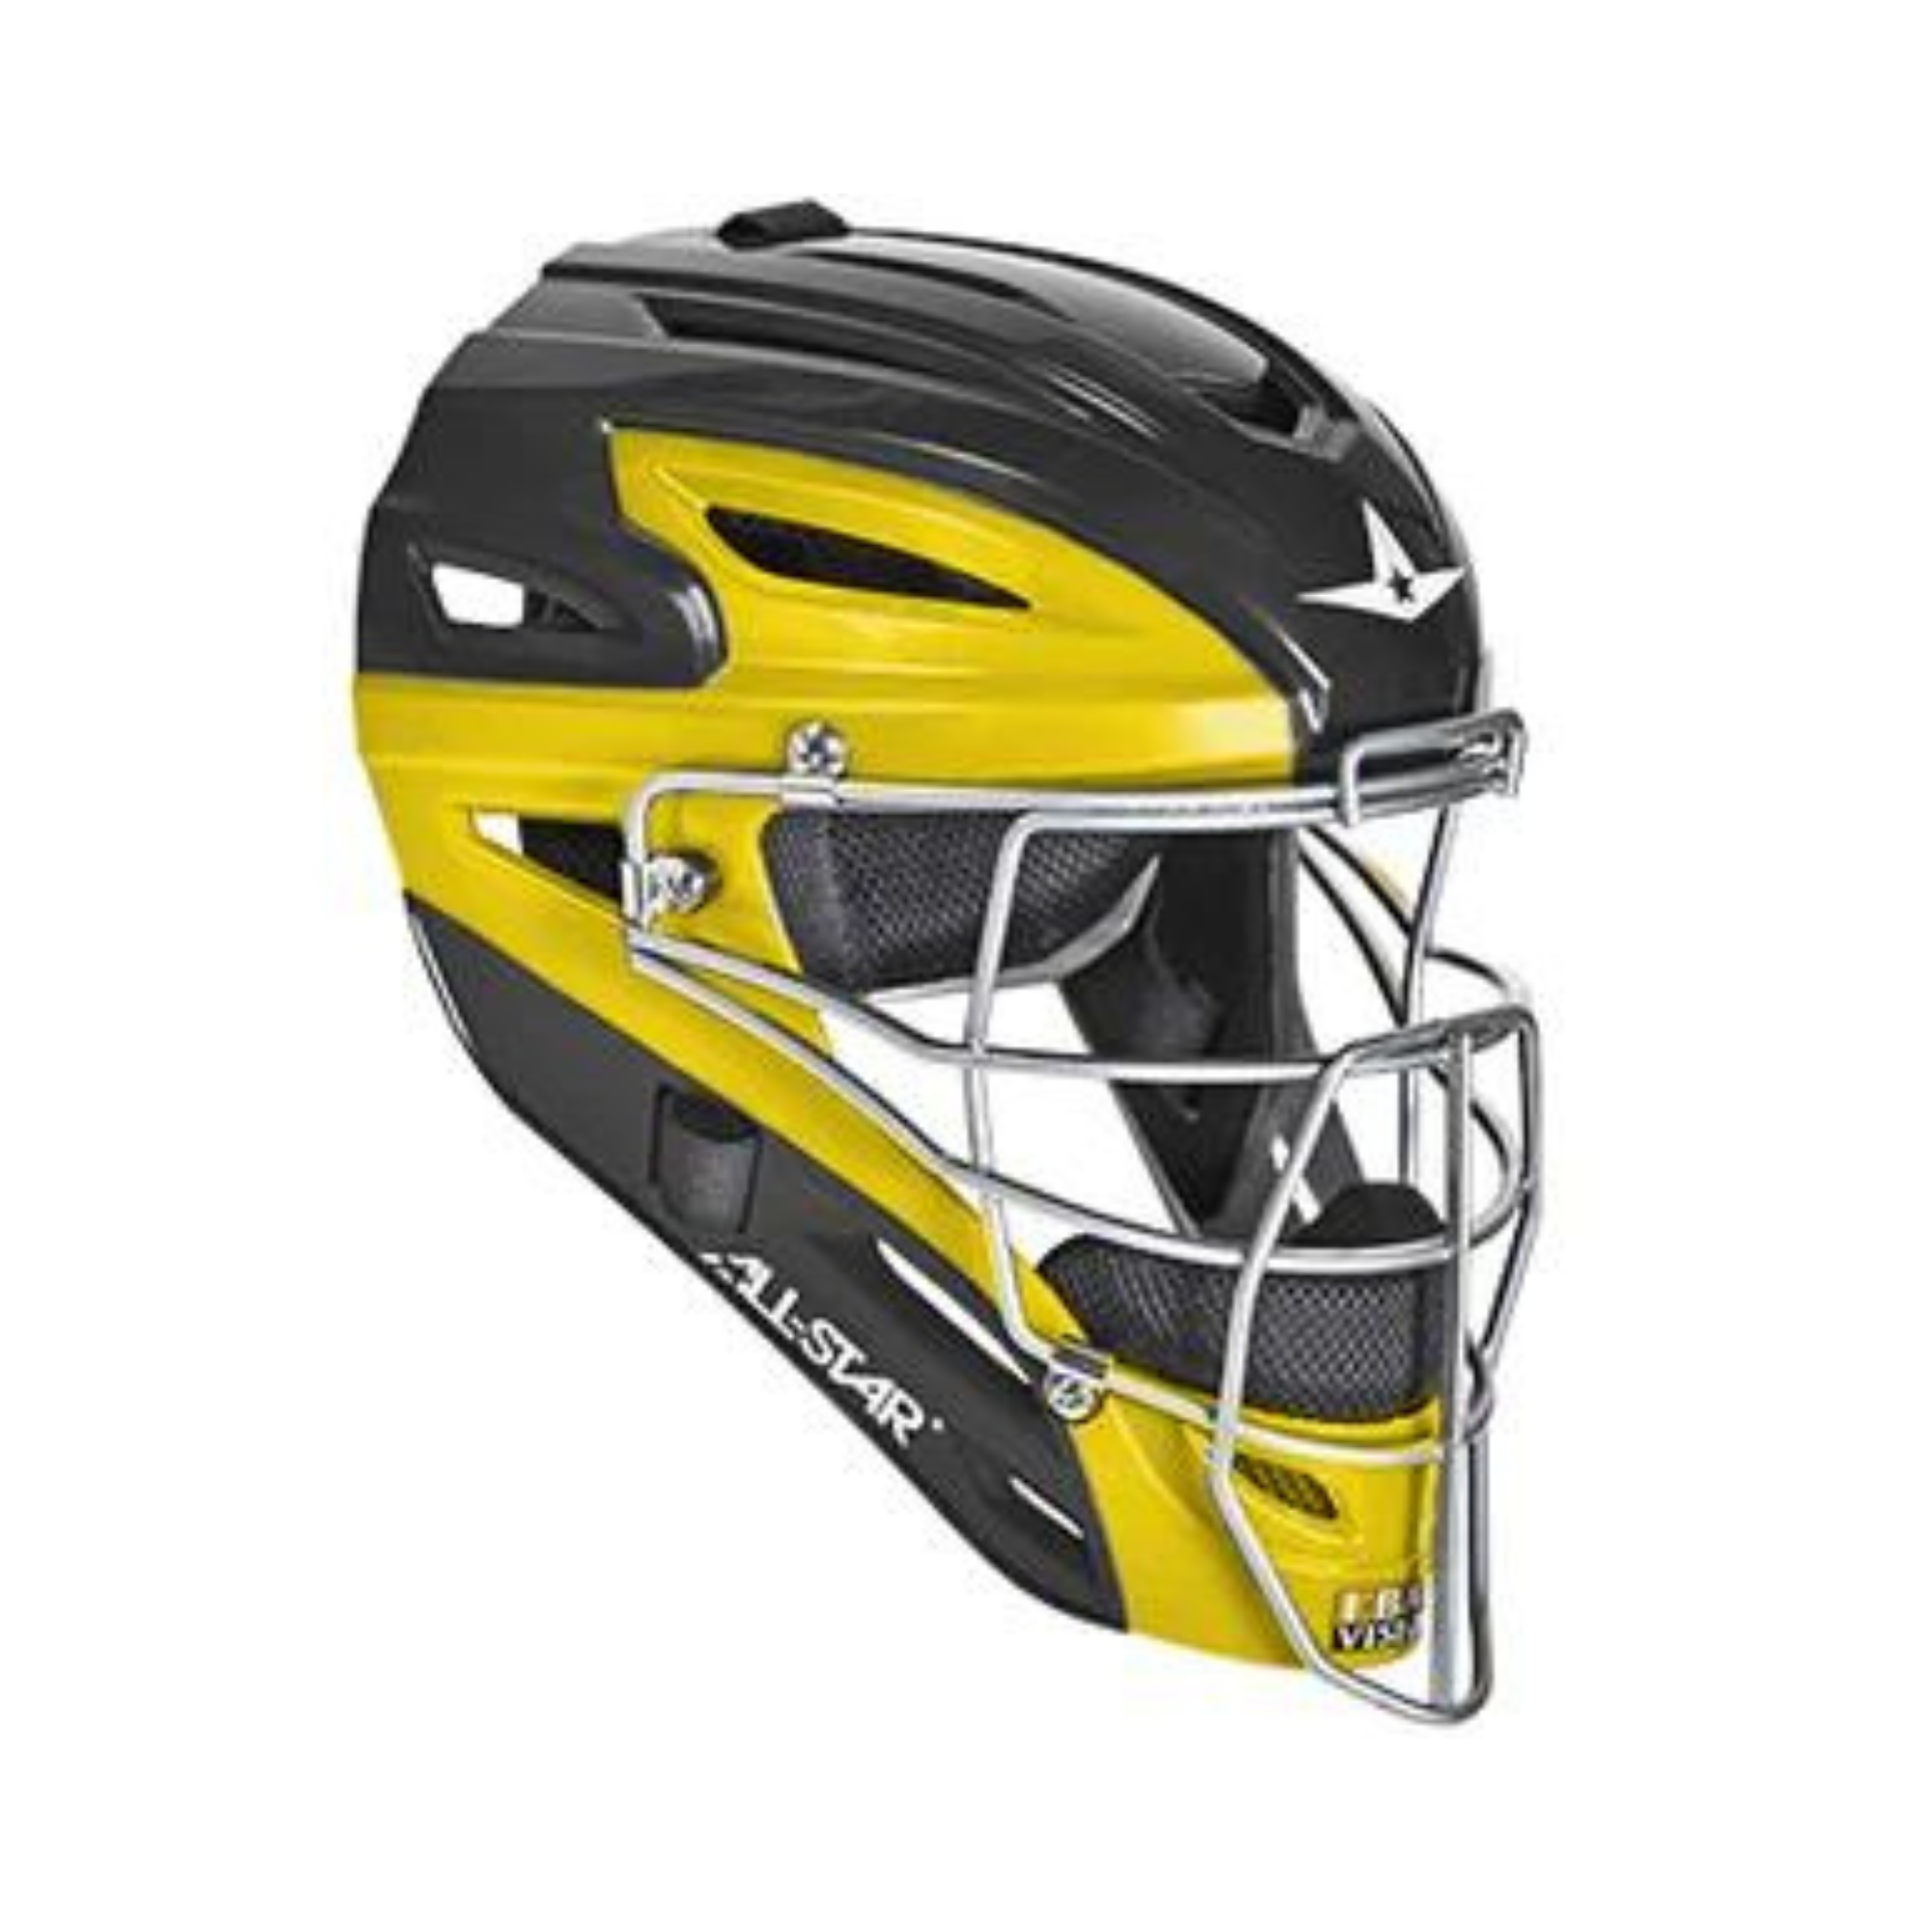 All-Star S7 Helmet / Meets NOCSAE / Two Tone / Adult